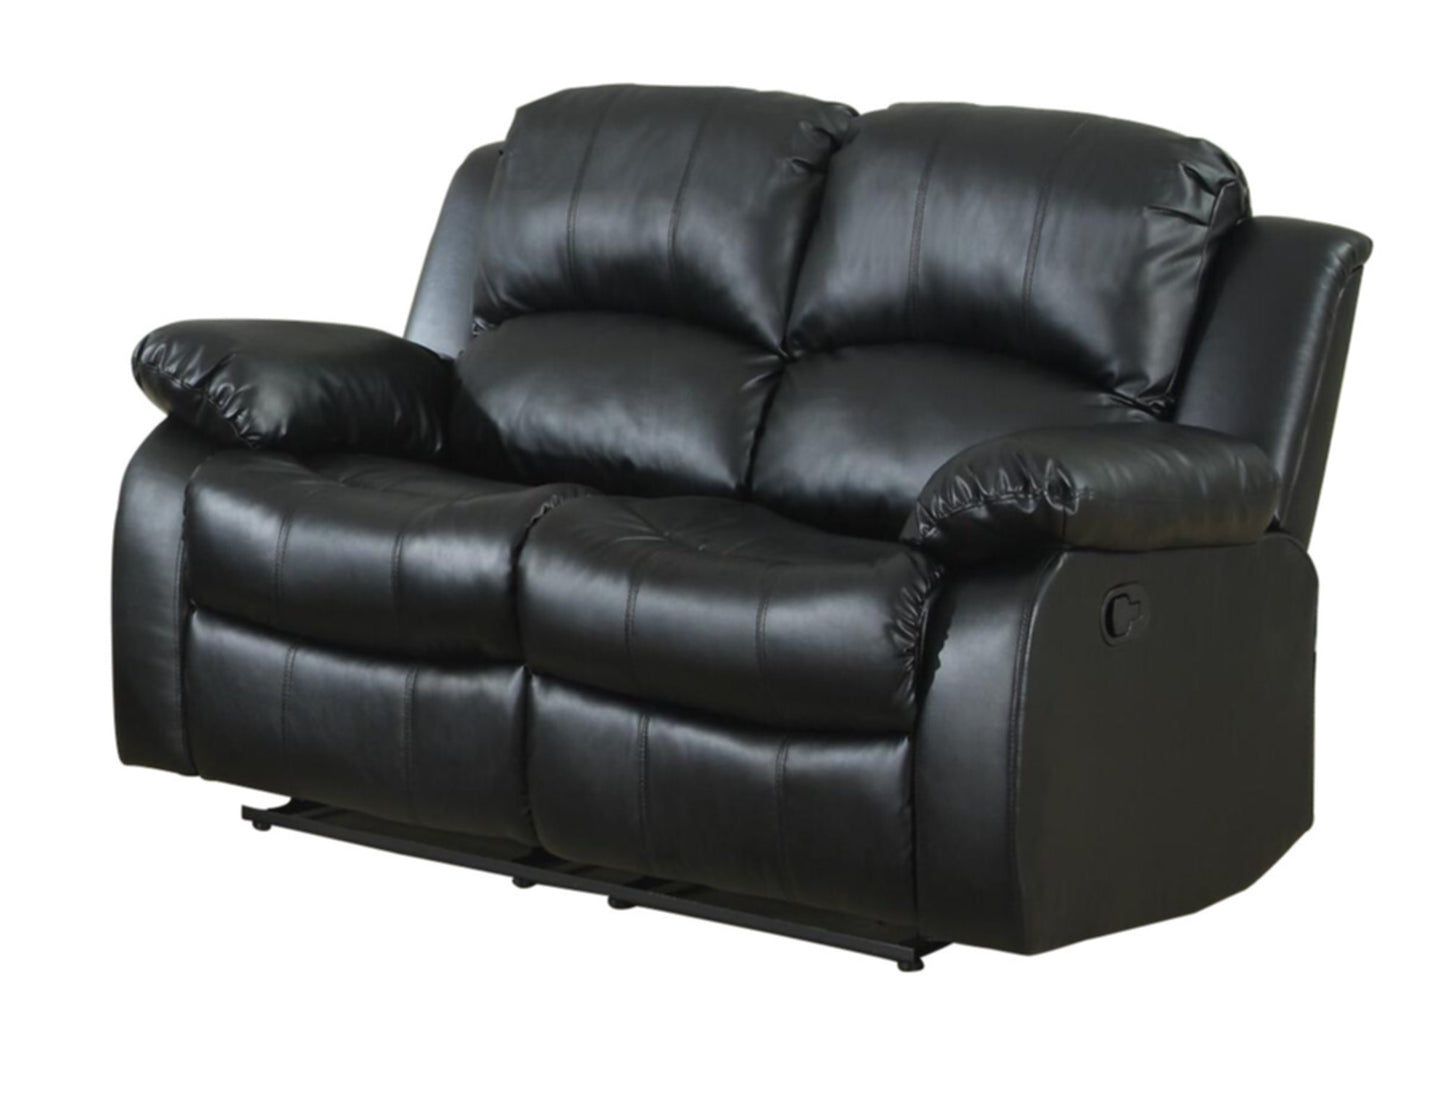 Homelegance Cranley 2PC Set Double Reclining Sofa & Love Seat in Leather - Black